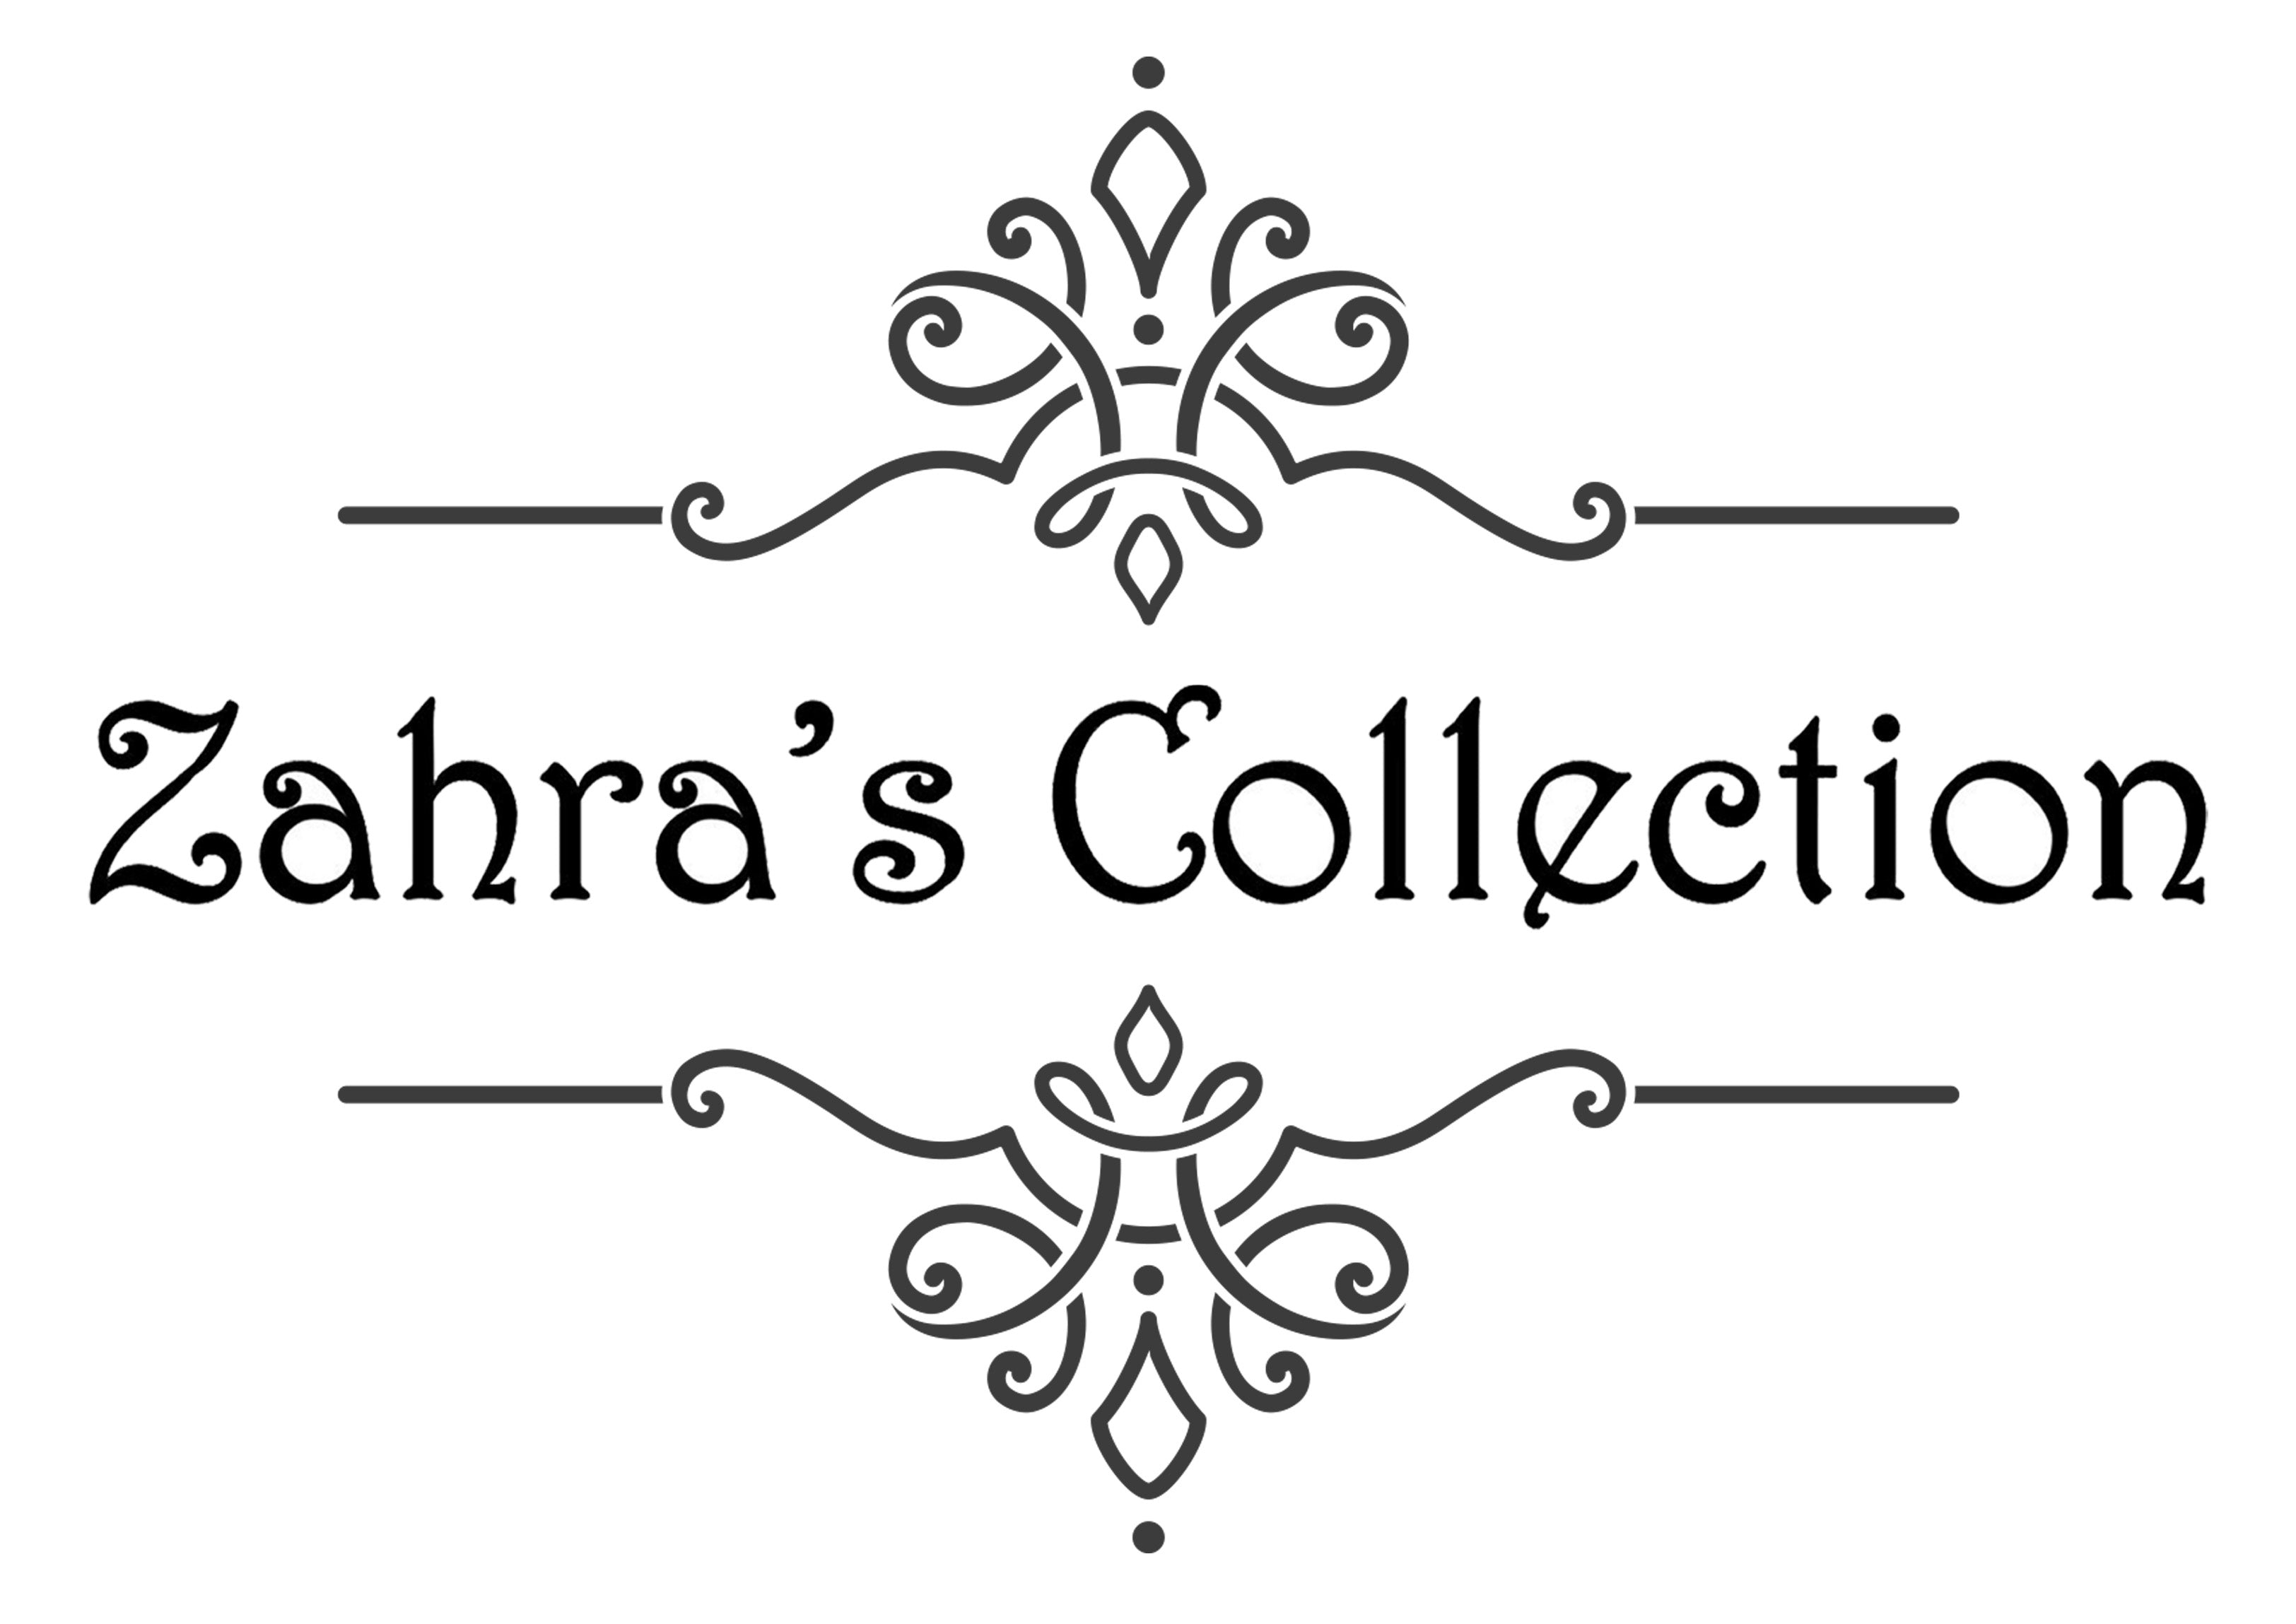 Zahra's Collection